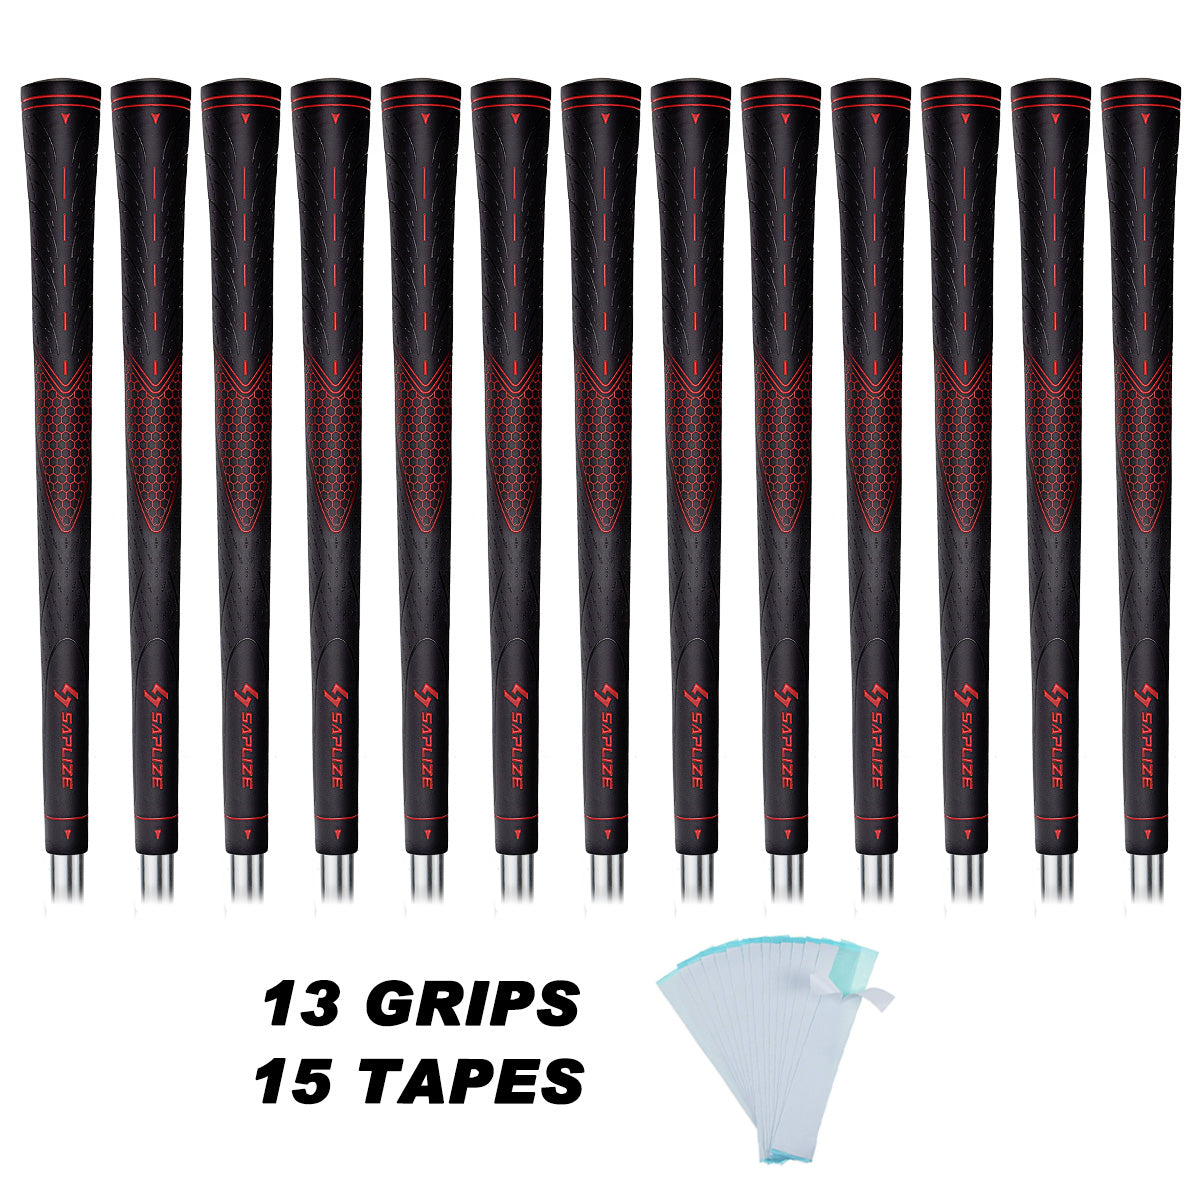 CC01 Rubber Golf Grips 13pcs with 15Tape